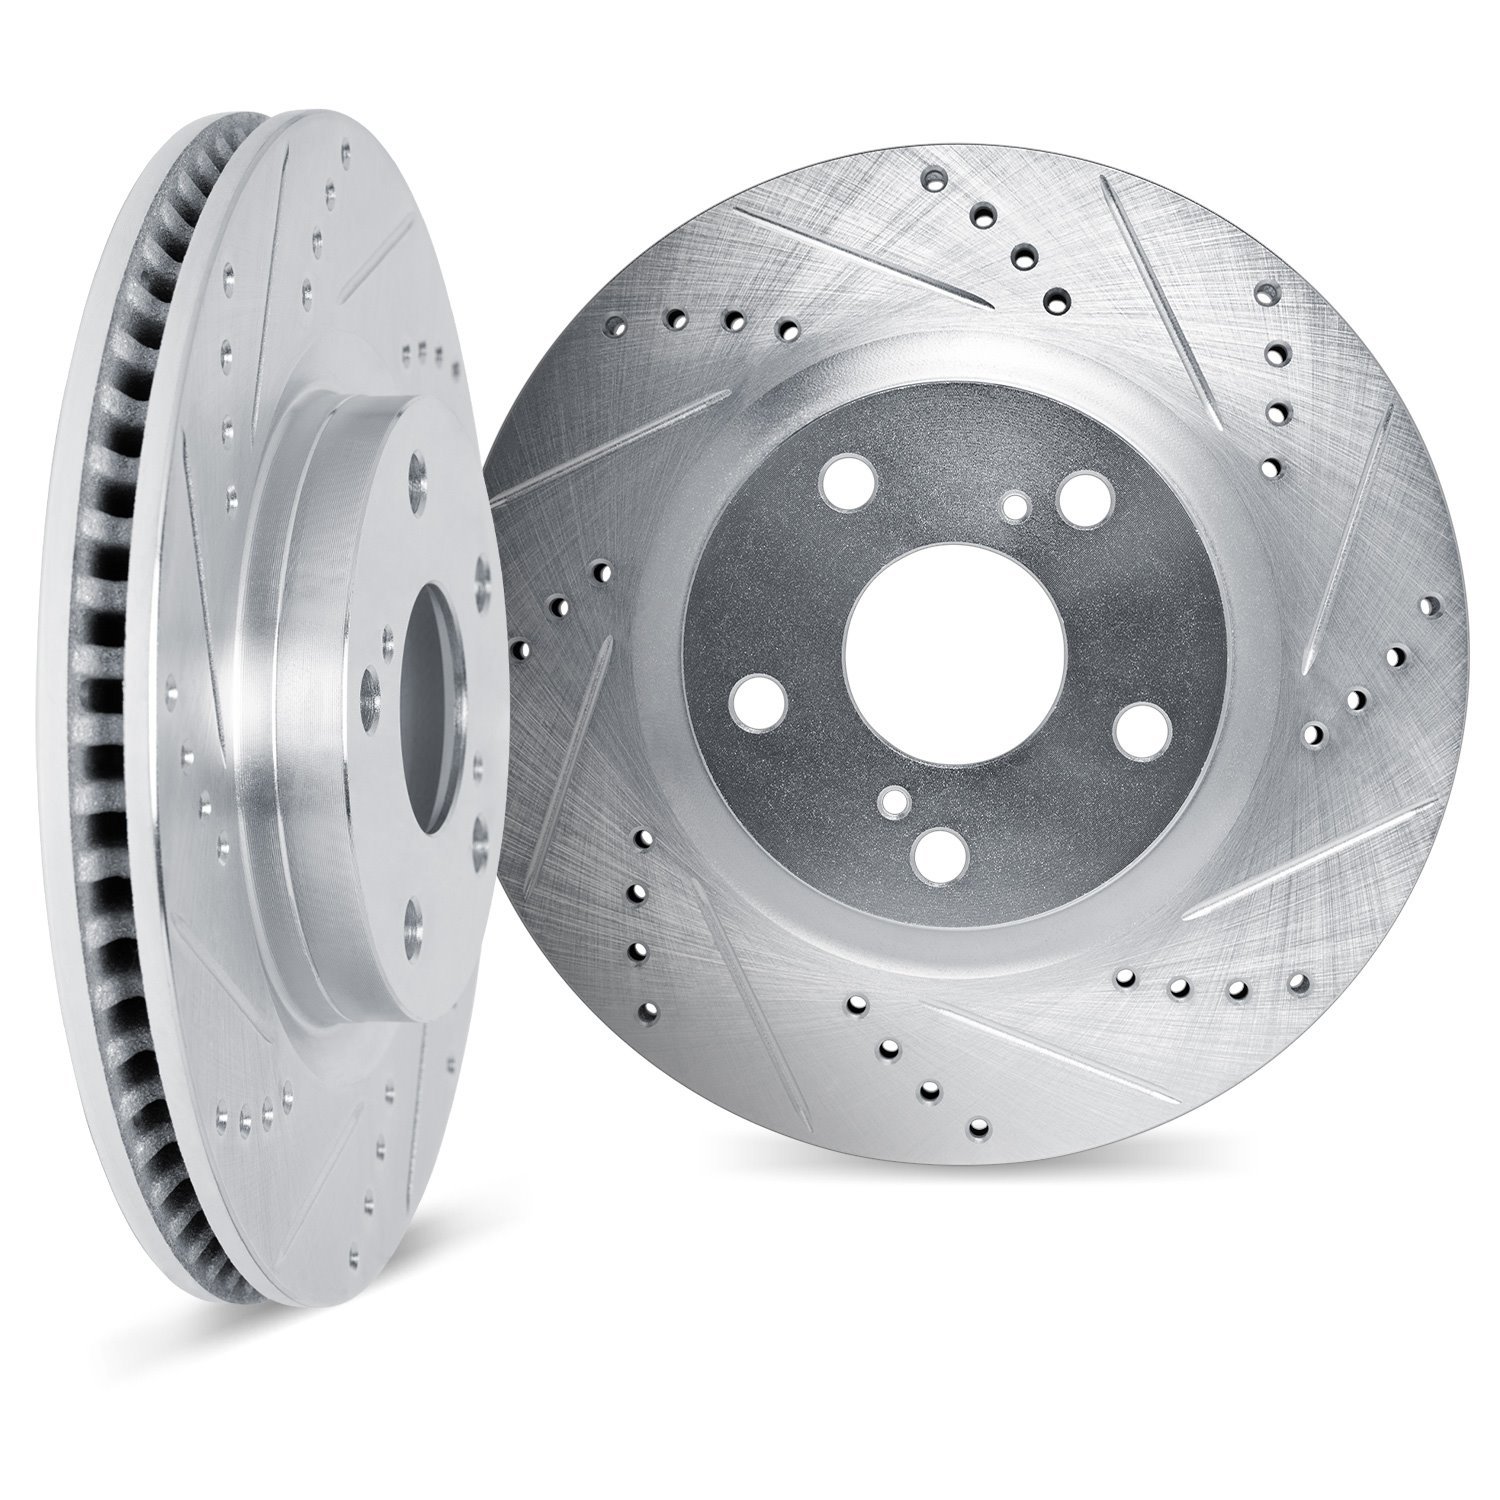 7002-79006 Drilled/Slotted Brake Rotors [Silver], Fits Select Maserati, Position: Rear